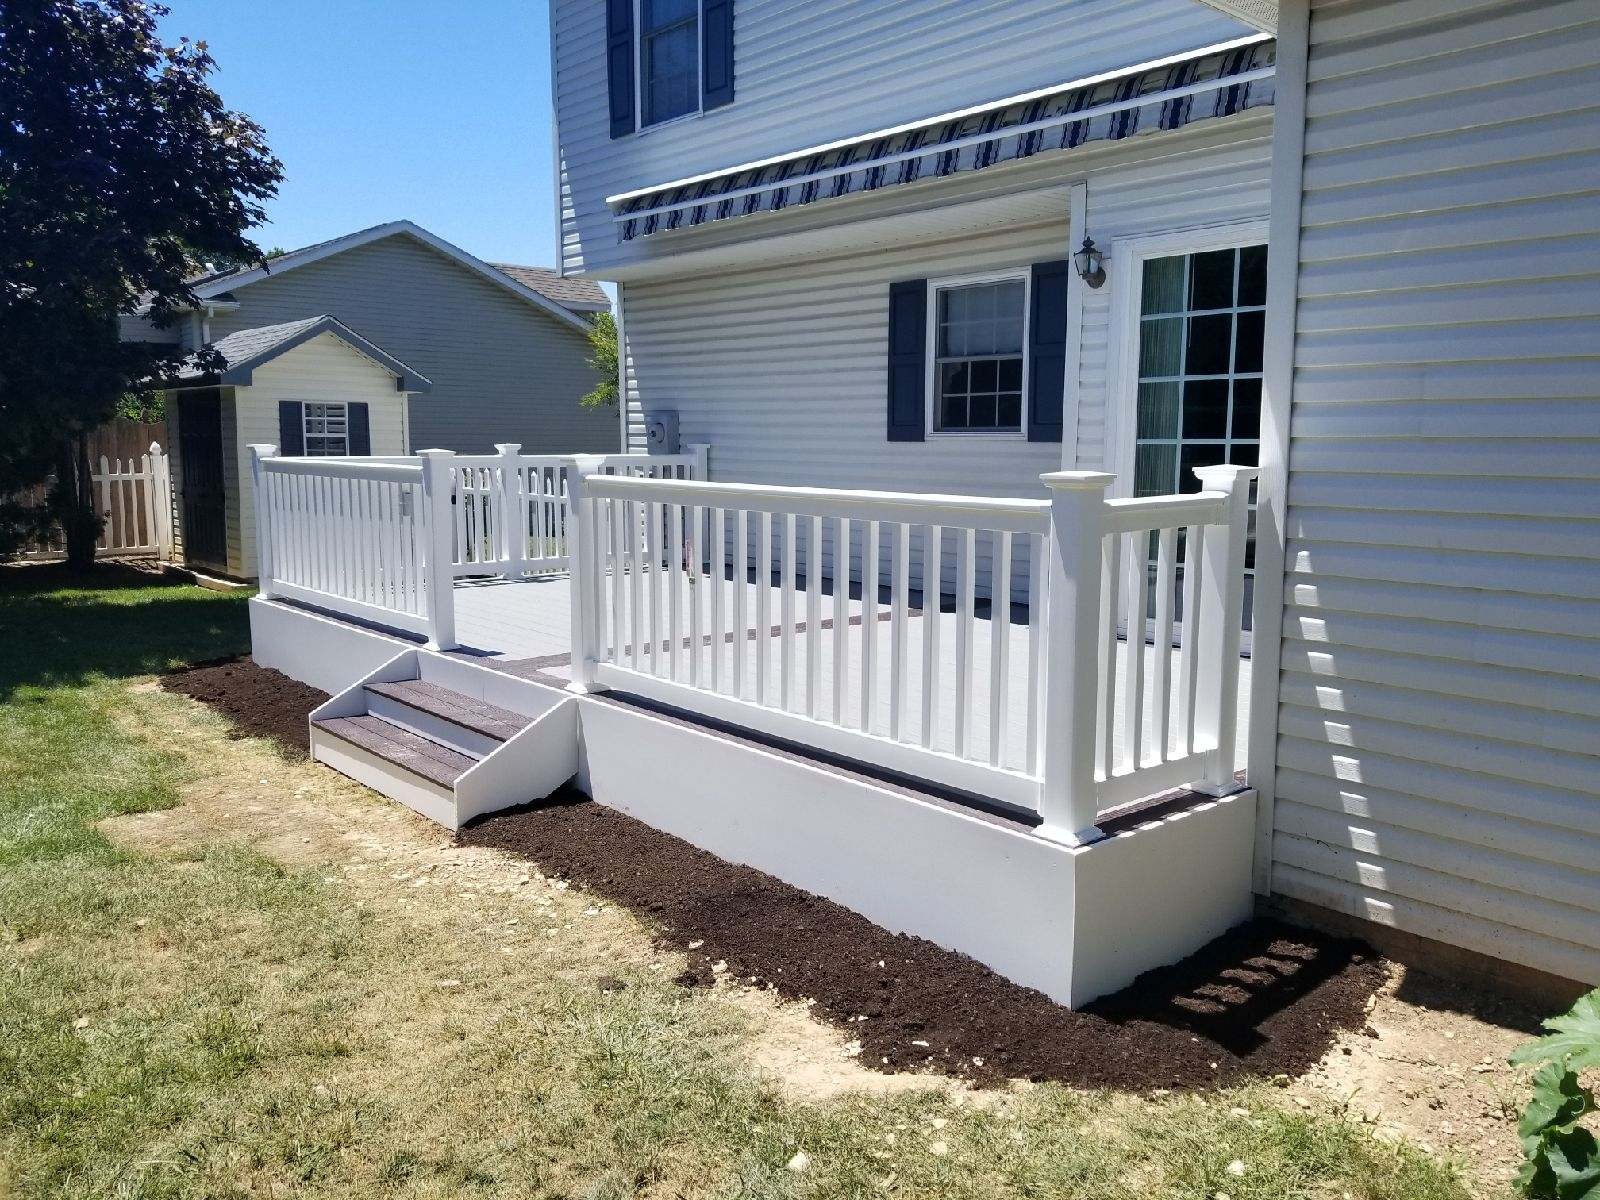 Deck Replacement - from Wood to Composite Picture Frame design